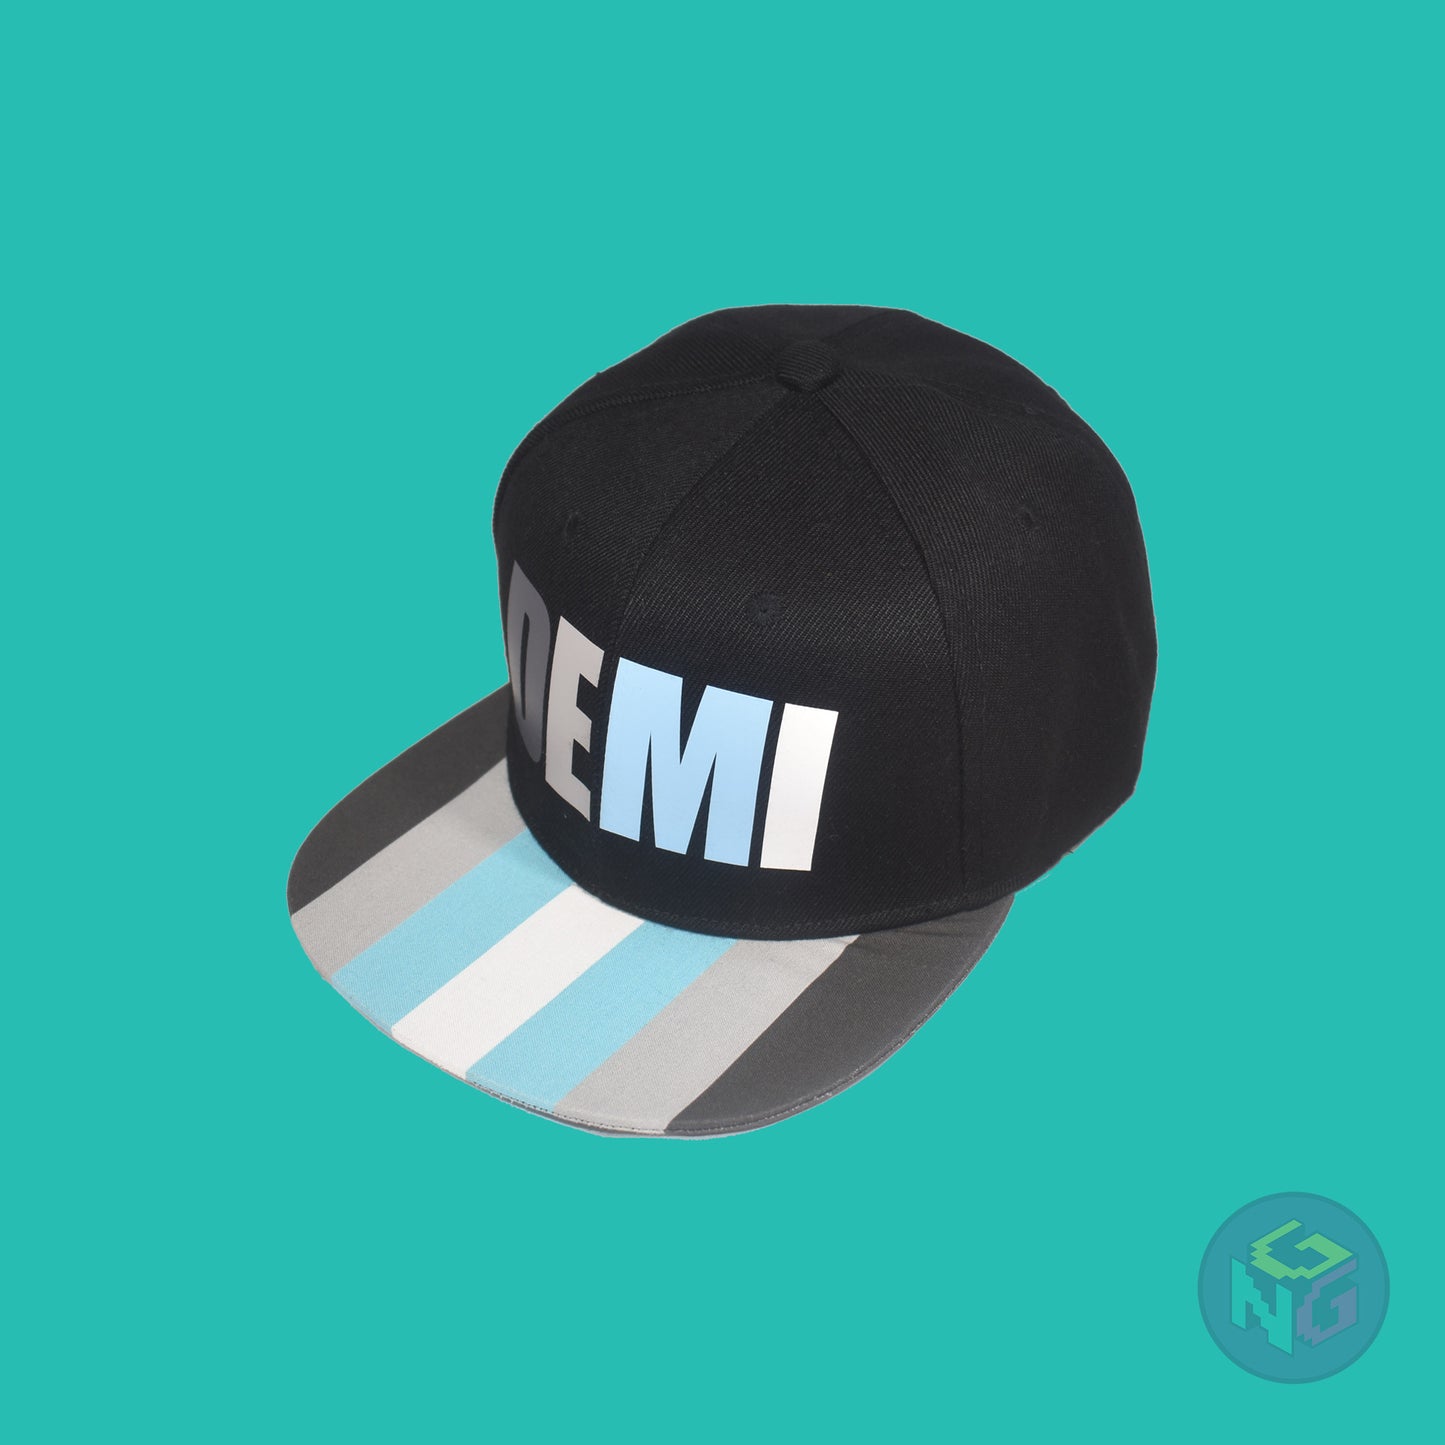 Black flat bill snapback hat. The brim has the demiboy pride flag on both sides and the front of the hat has the word “DEMI” in dark grey, light grey, blue, and white. Front left view